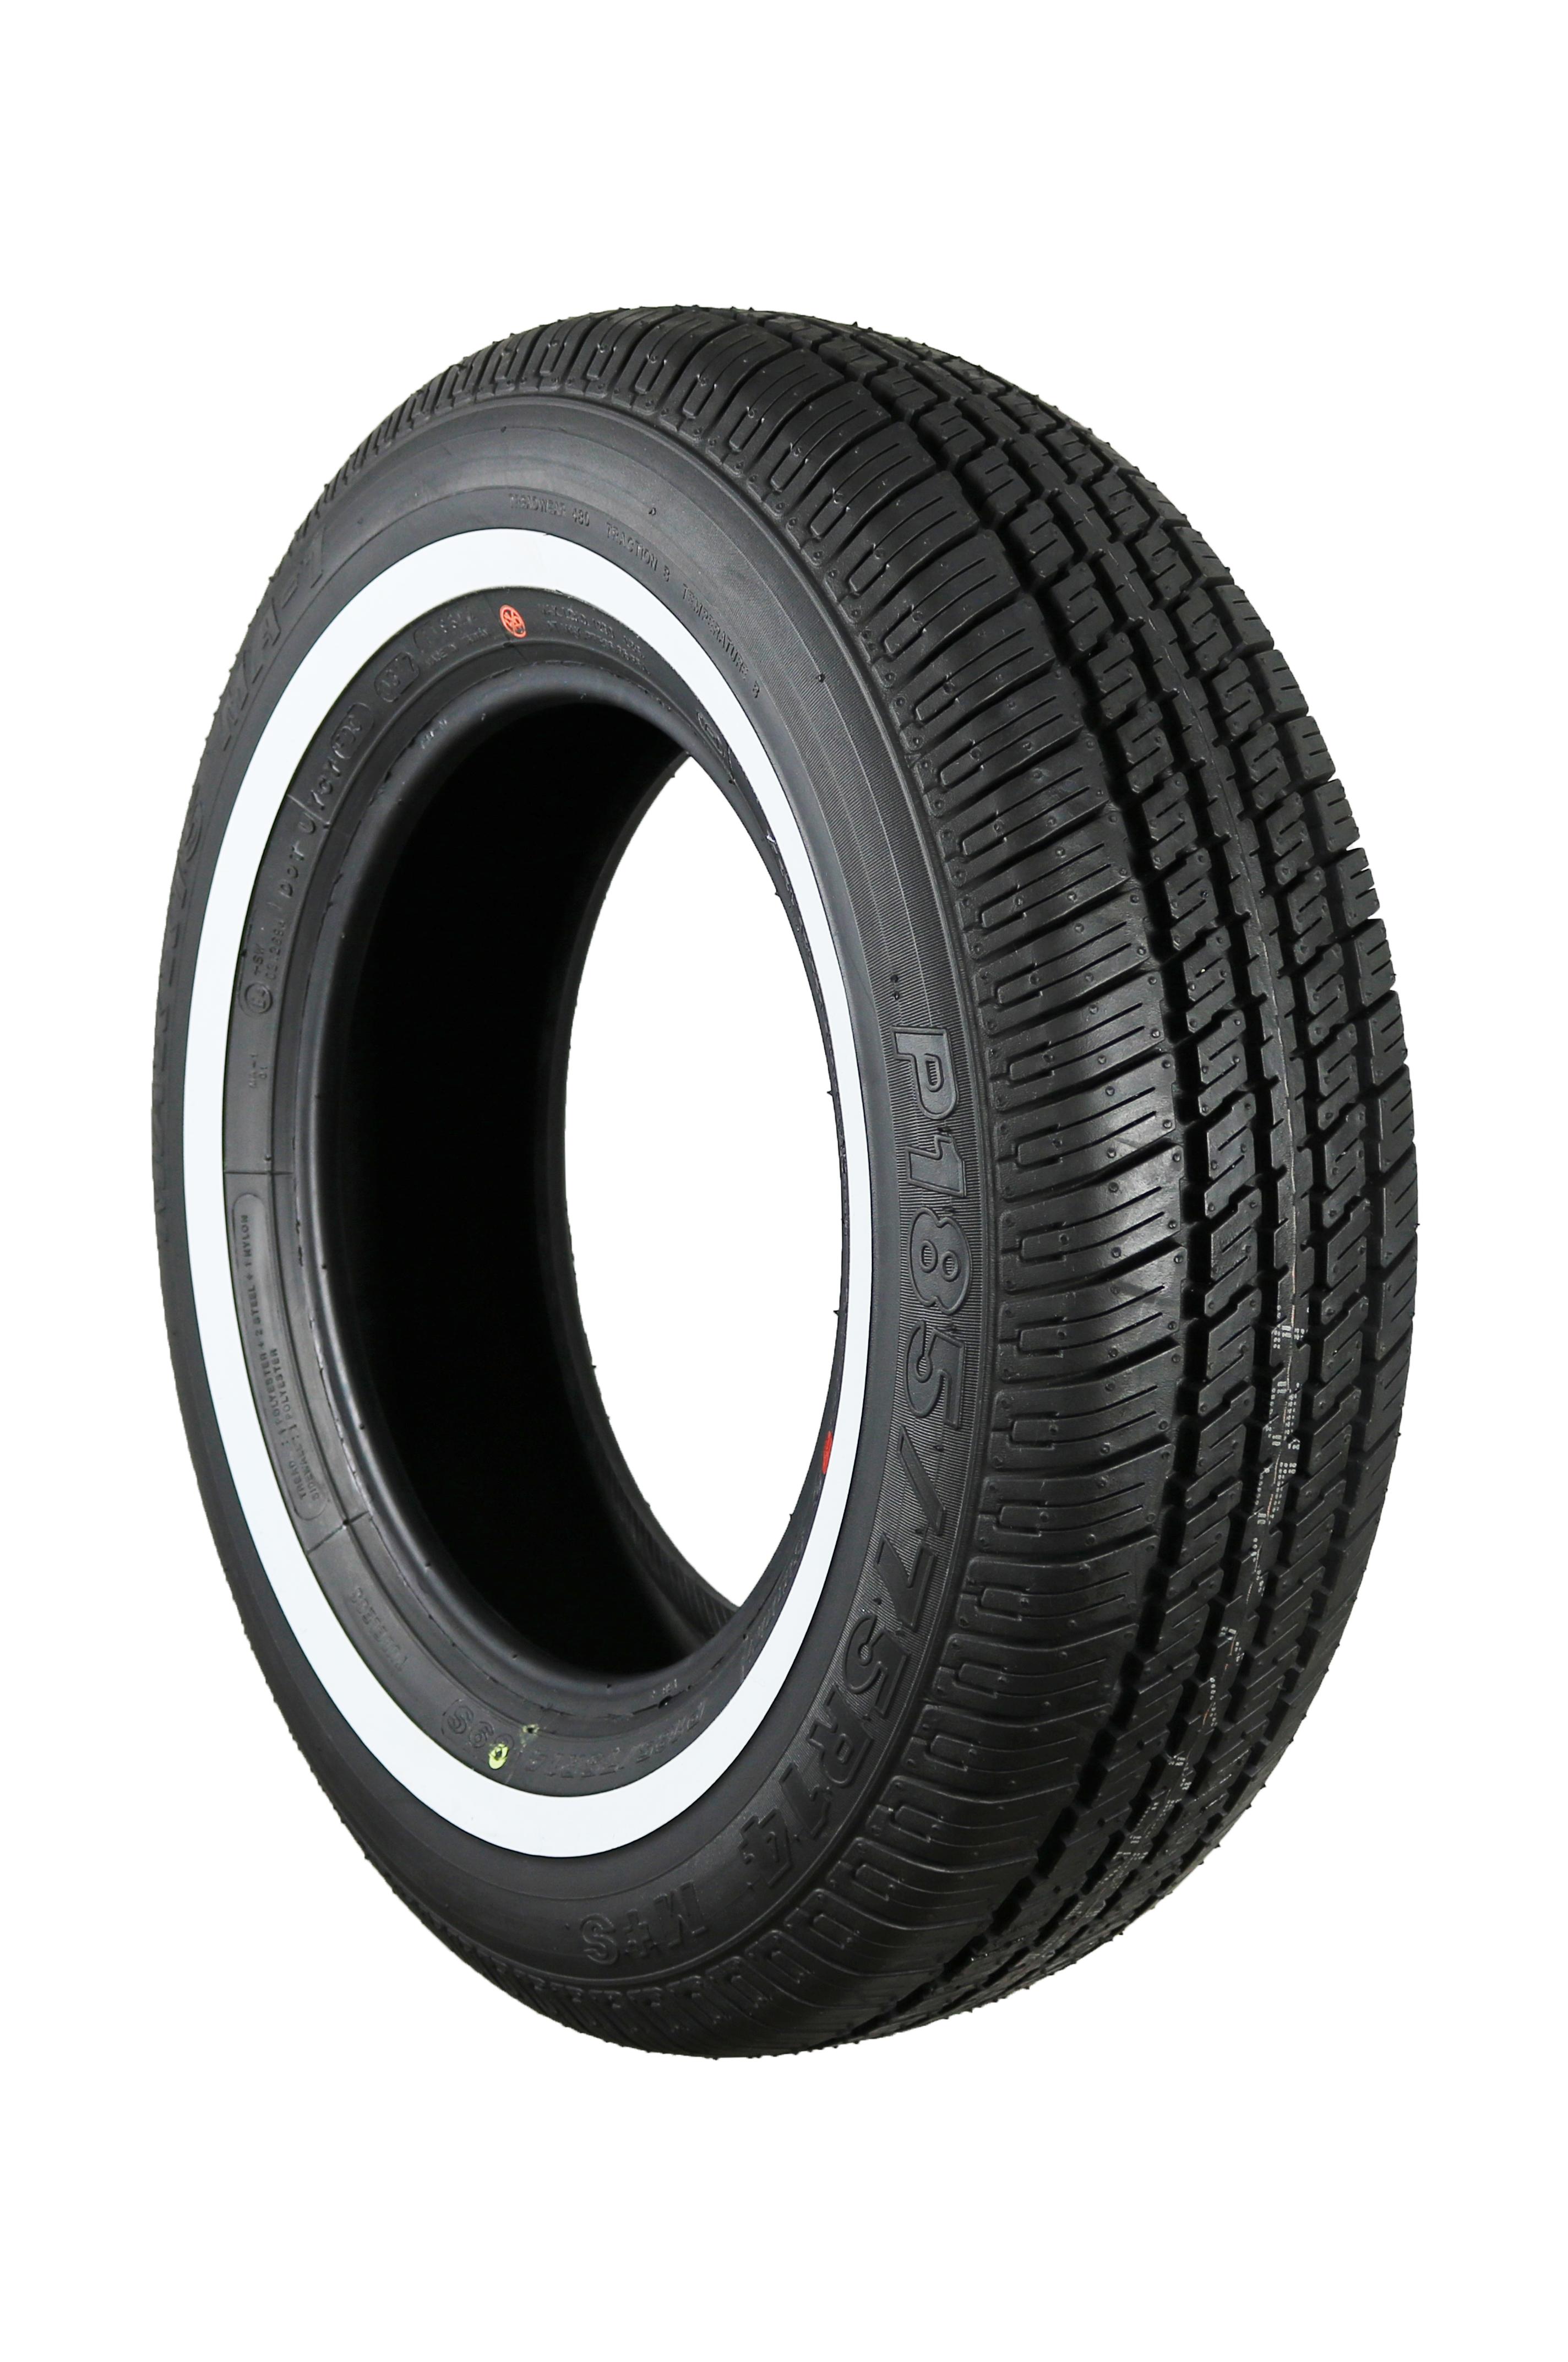 MA-1 | Classic 89S Tyres WSW Maxxis 185/75R14 & Vintage 22mm